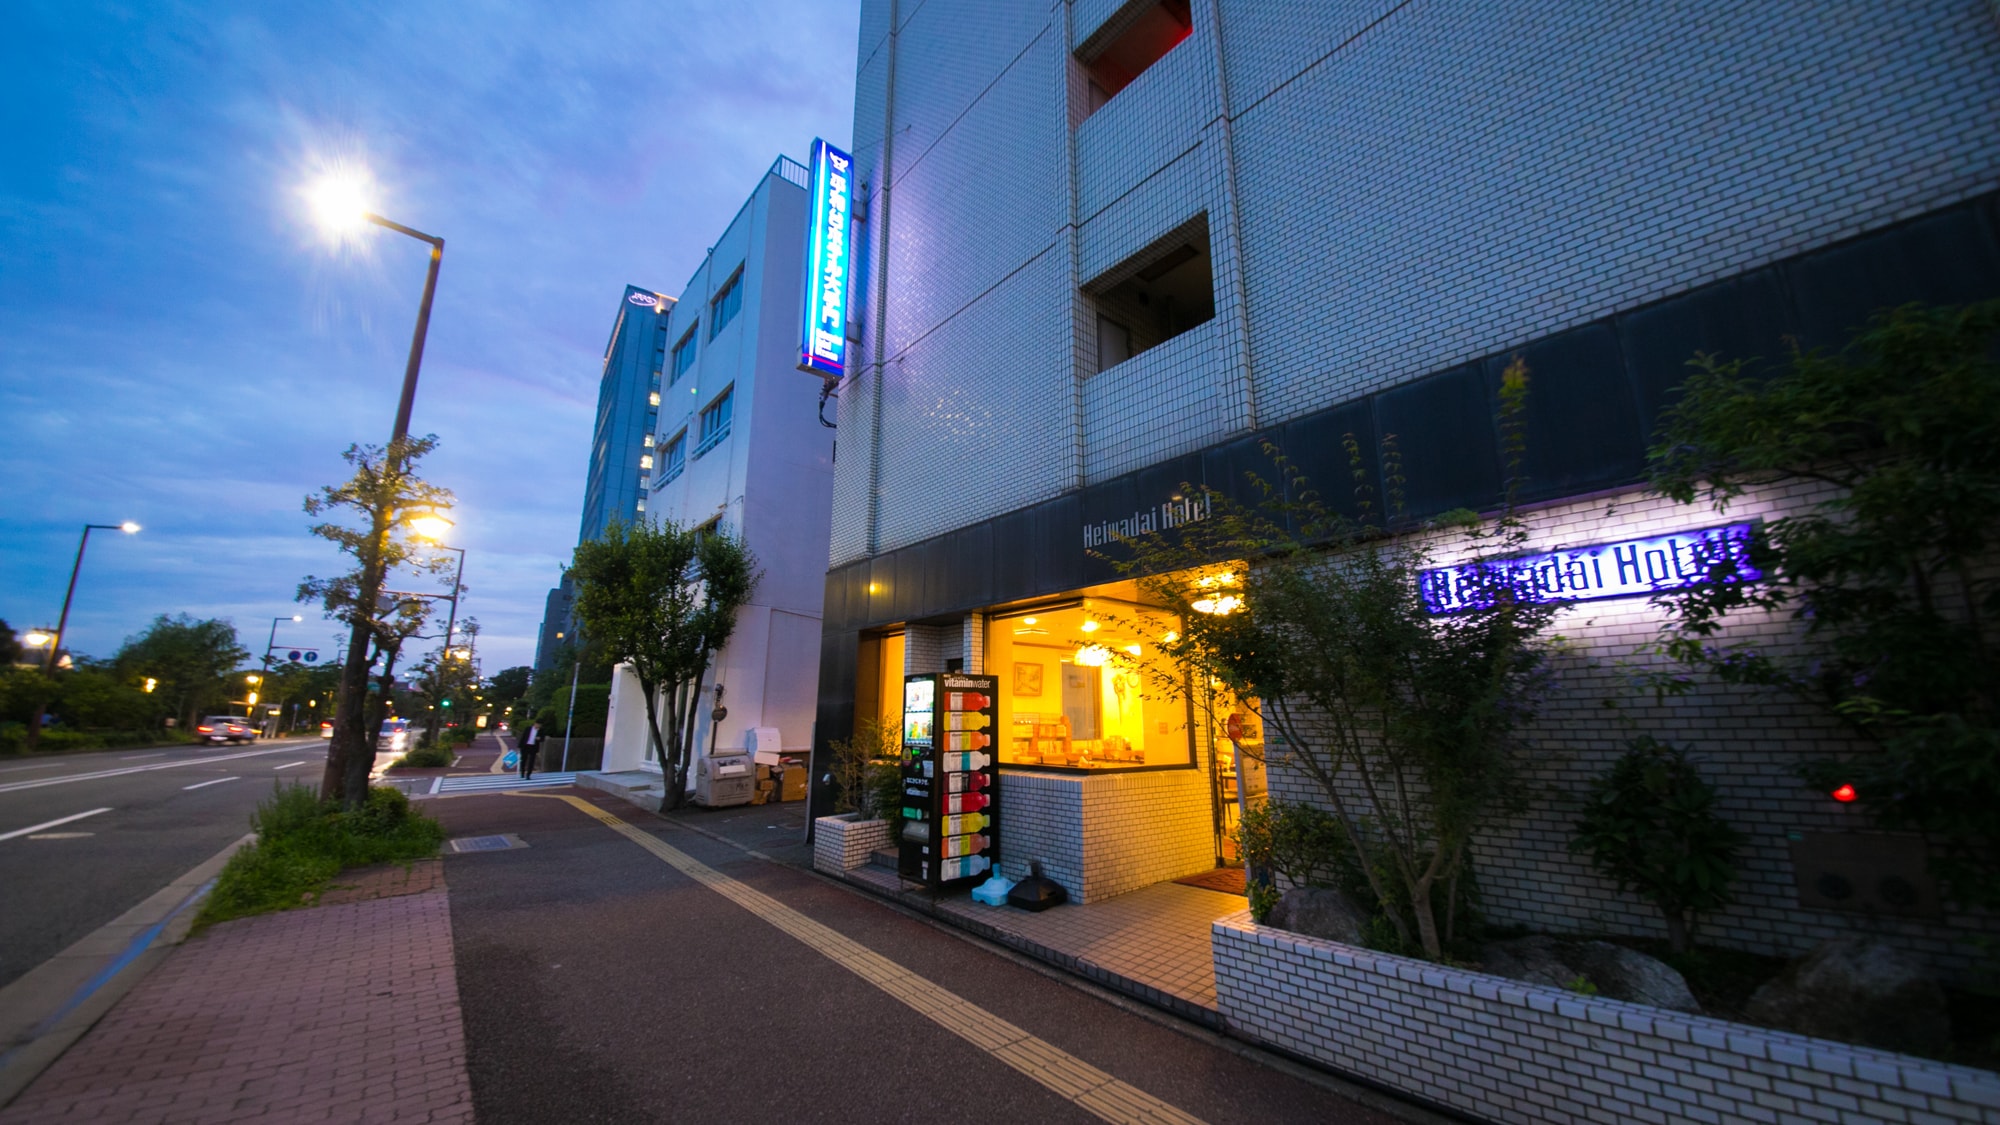 [Heiwadai Hotel Otemon] 6 minutes on foot from Ohori Park subway ♪ I hope you have a wonderful trip (*^^*)